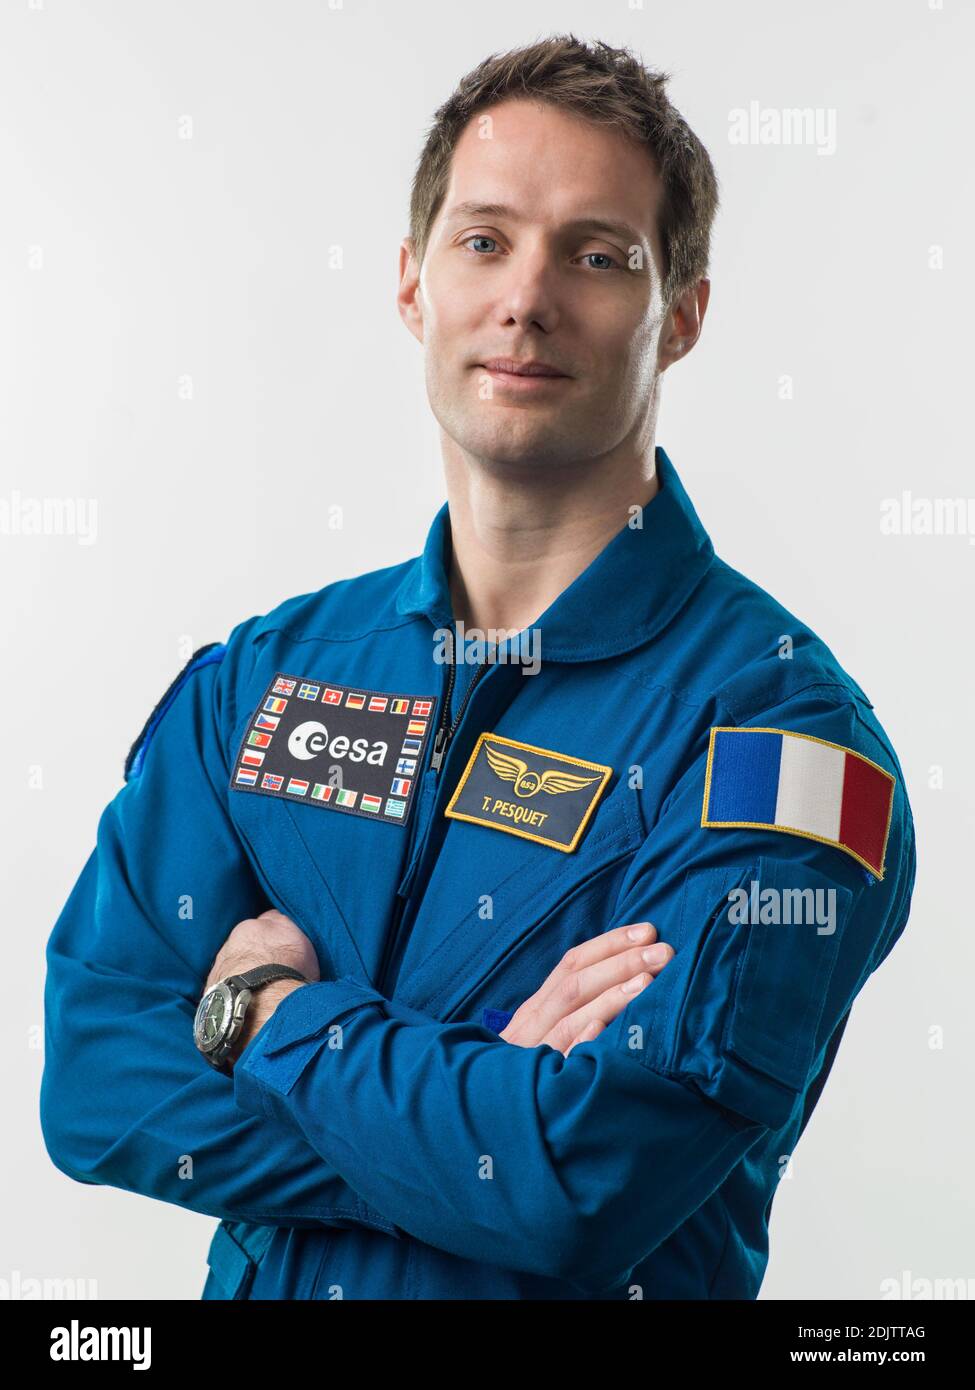 Official portrait of ESA astronaut & Expedition 50/51 crew member Thomas Pesquet in blue flight suit in Nasa center Building 8 in Houston Texas, USA on January 14, 2016. Photo by Bill Stafford/NASA via ABACAPRESS.COM Stock Photo